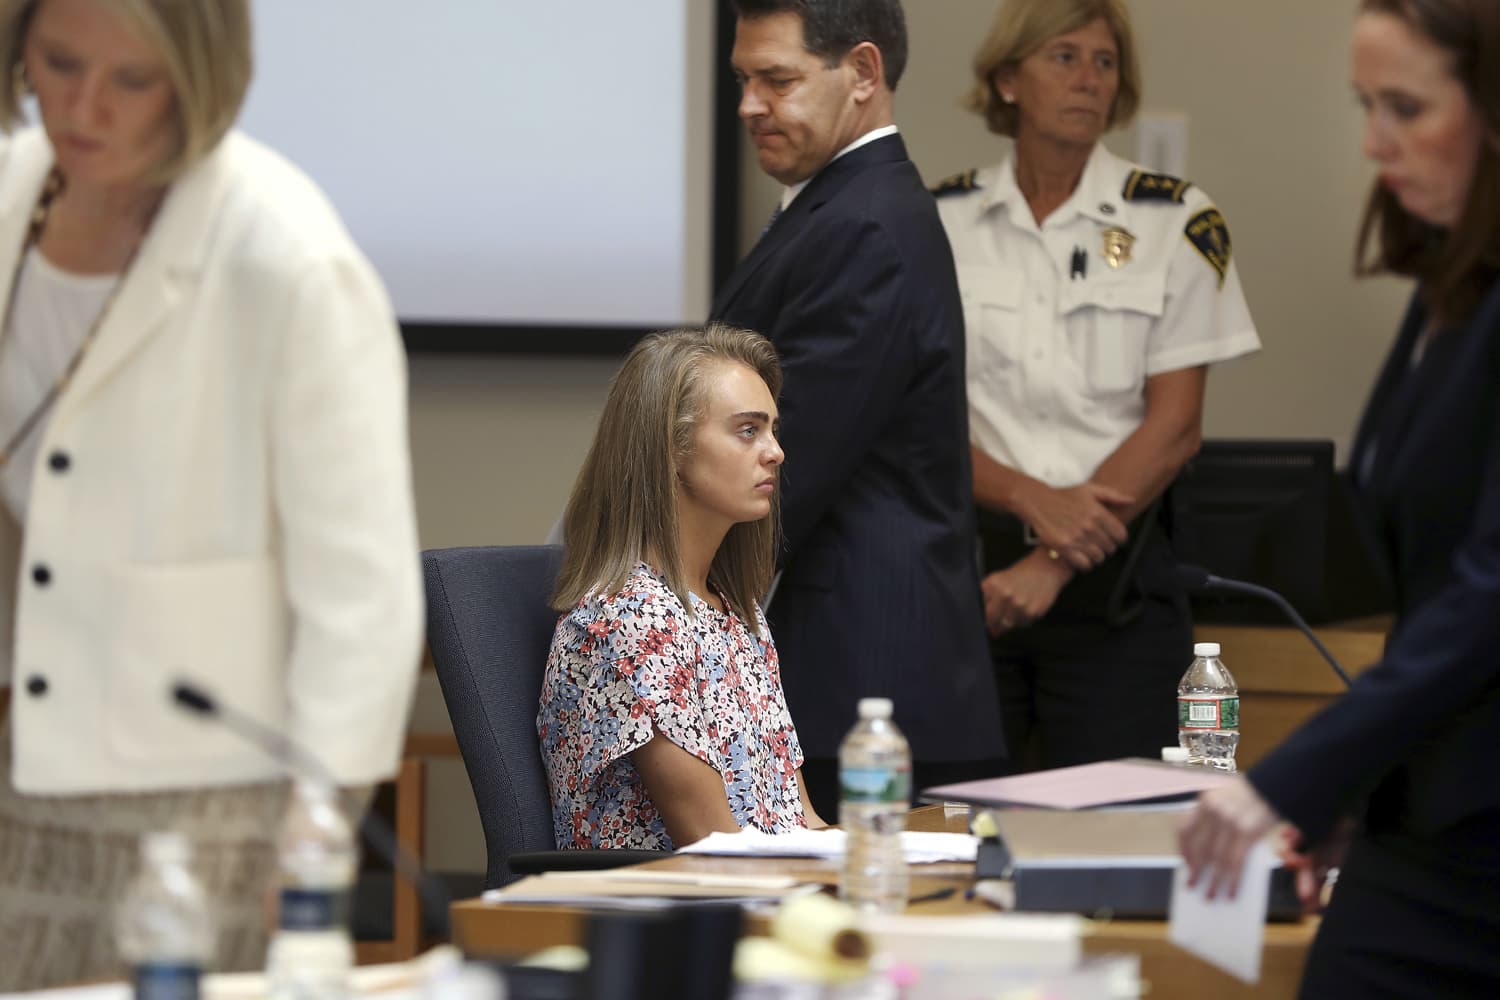 A Verdict In A Texting Suicide Case | On Point